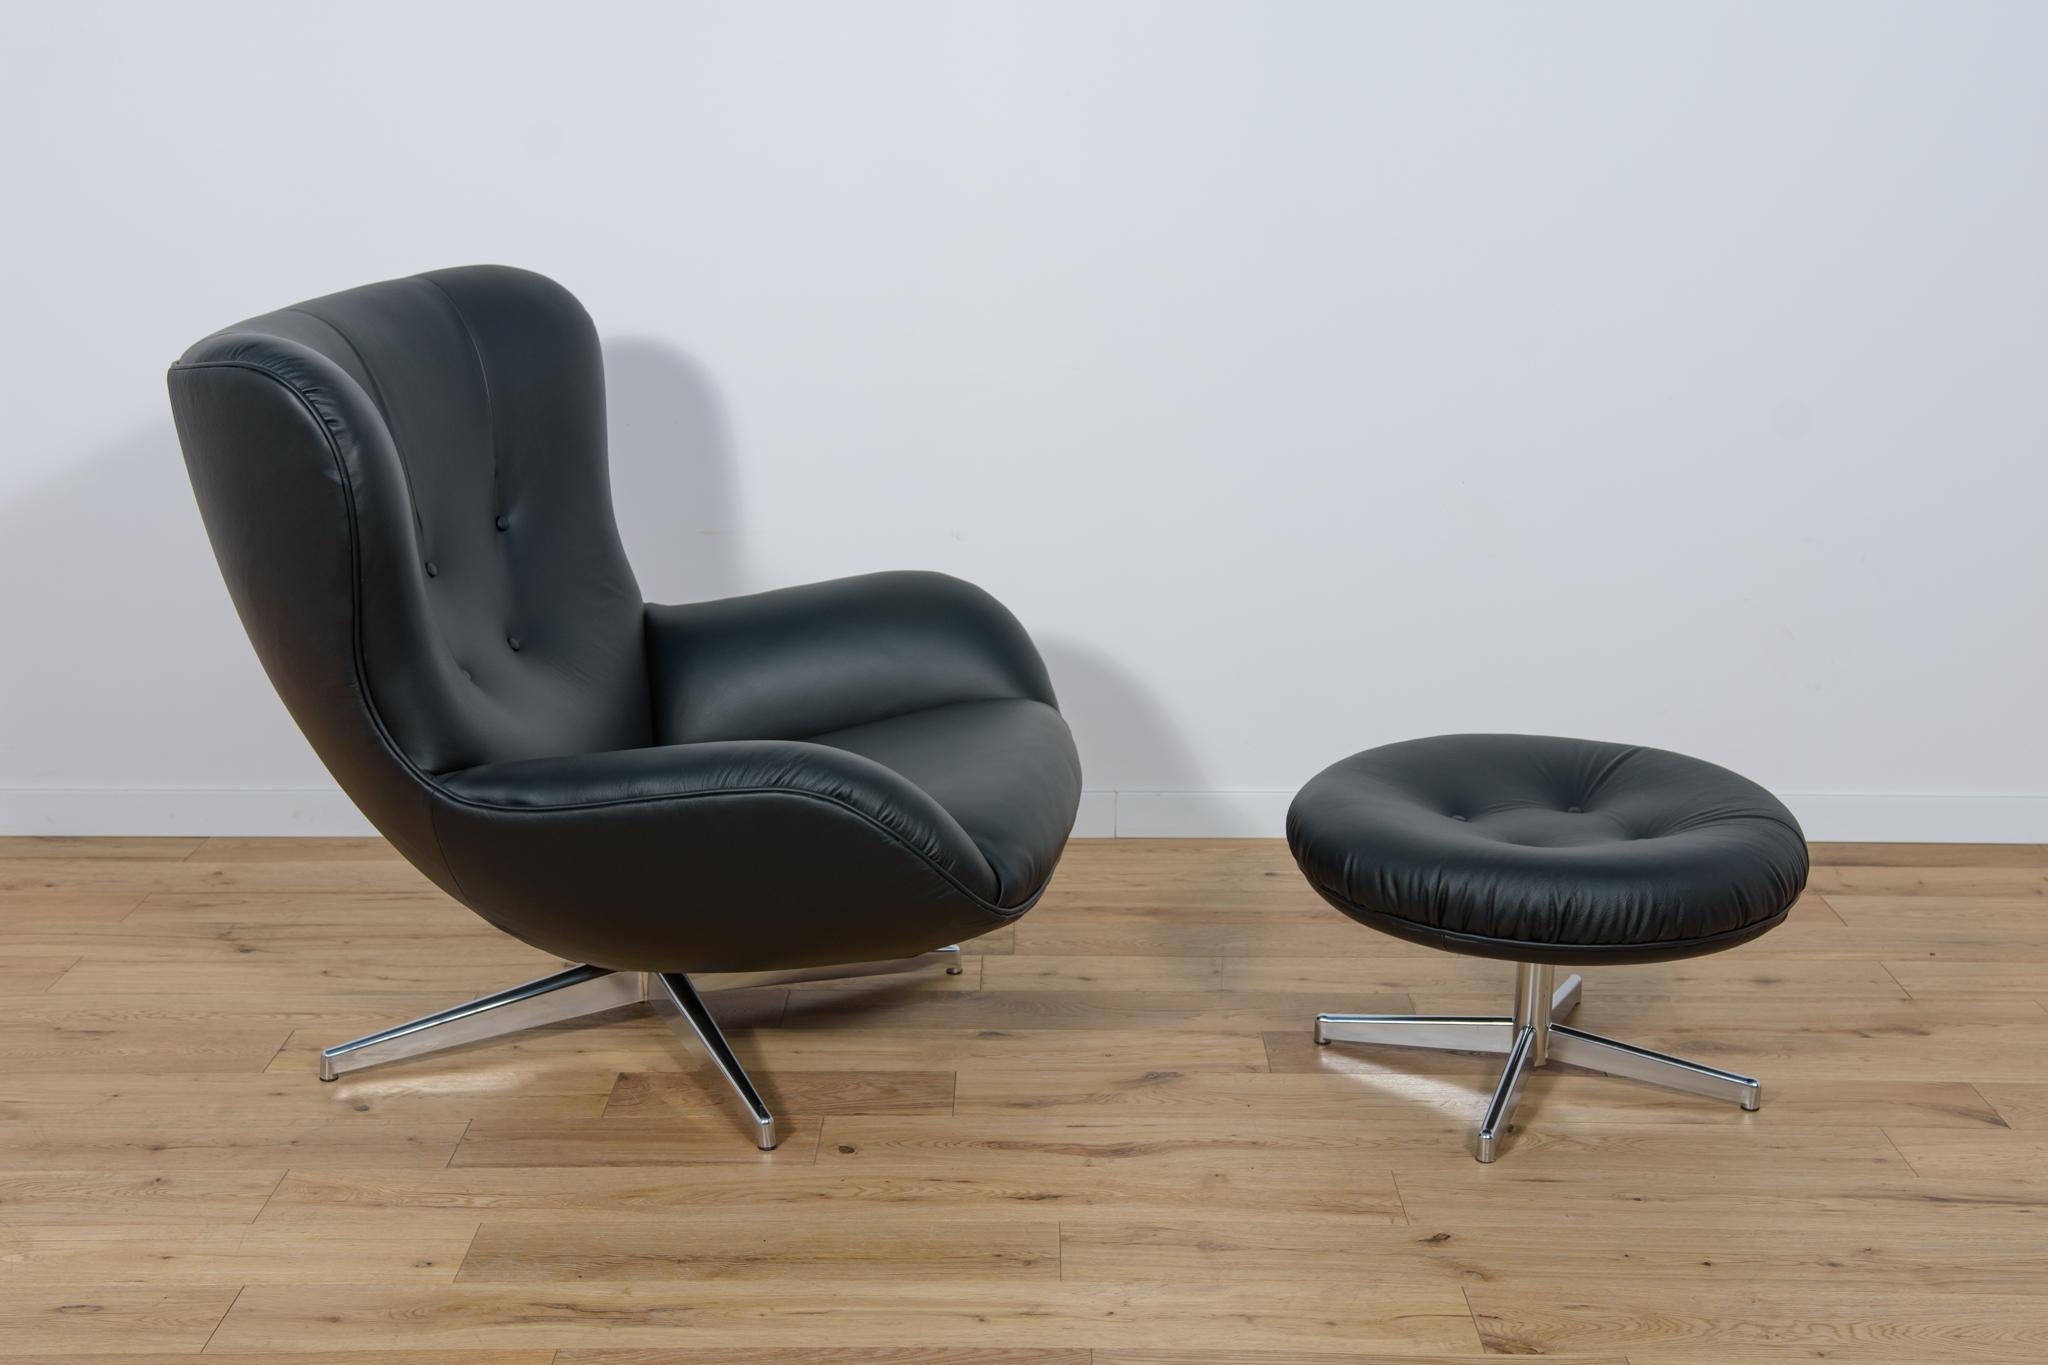 Model ML 214 Lounge Chair with ottoman designed by Illum Wikkelsø for Mikael Laursen in Denmark in the 1960s. Organic shaped armchair in black leather. A swivel armchair showing several contrasts. First, contrasts of materials. X-shaped leg in